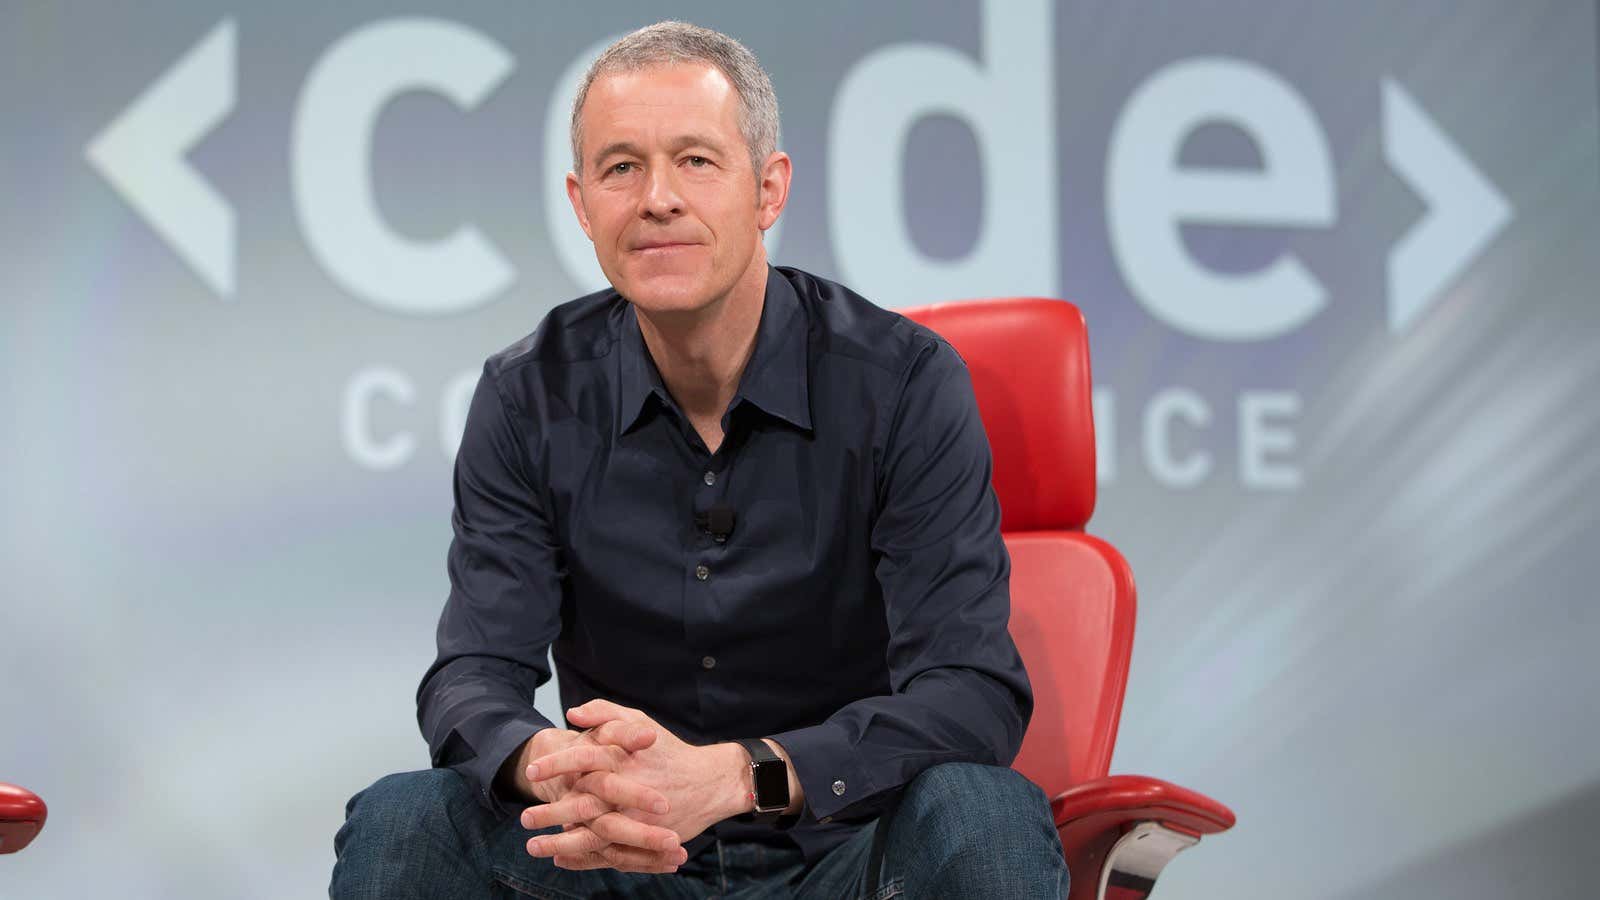 Apple’s Jeff Williams at the 2015 Code Conference.